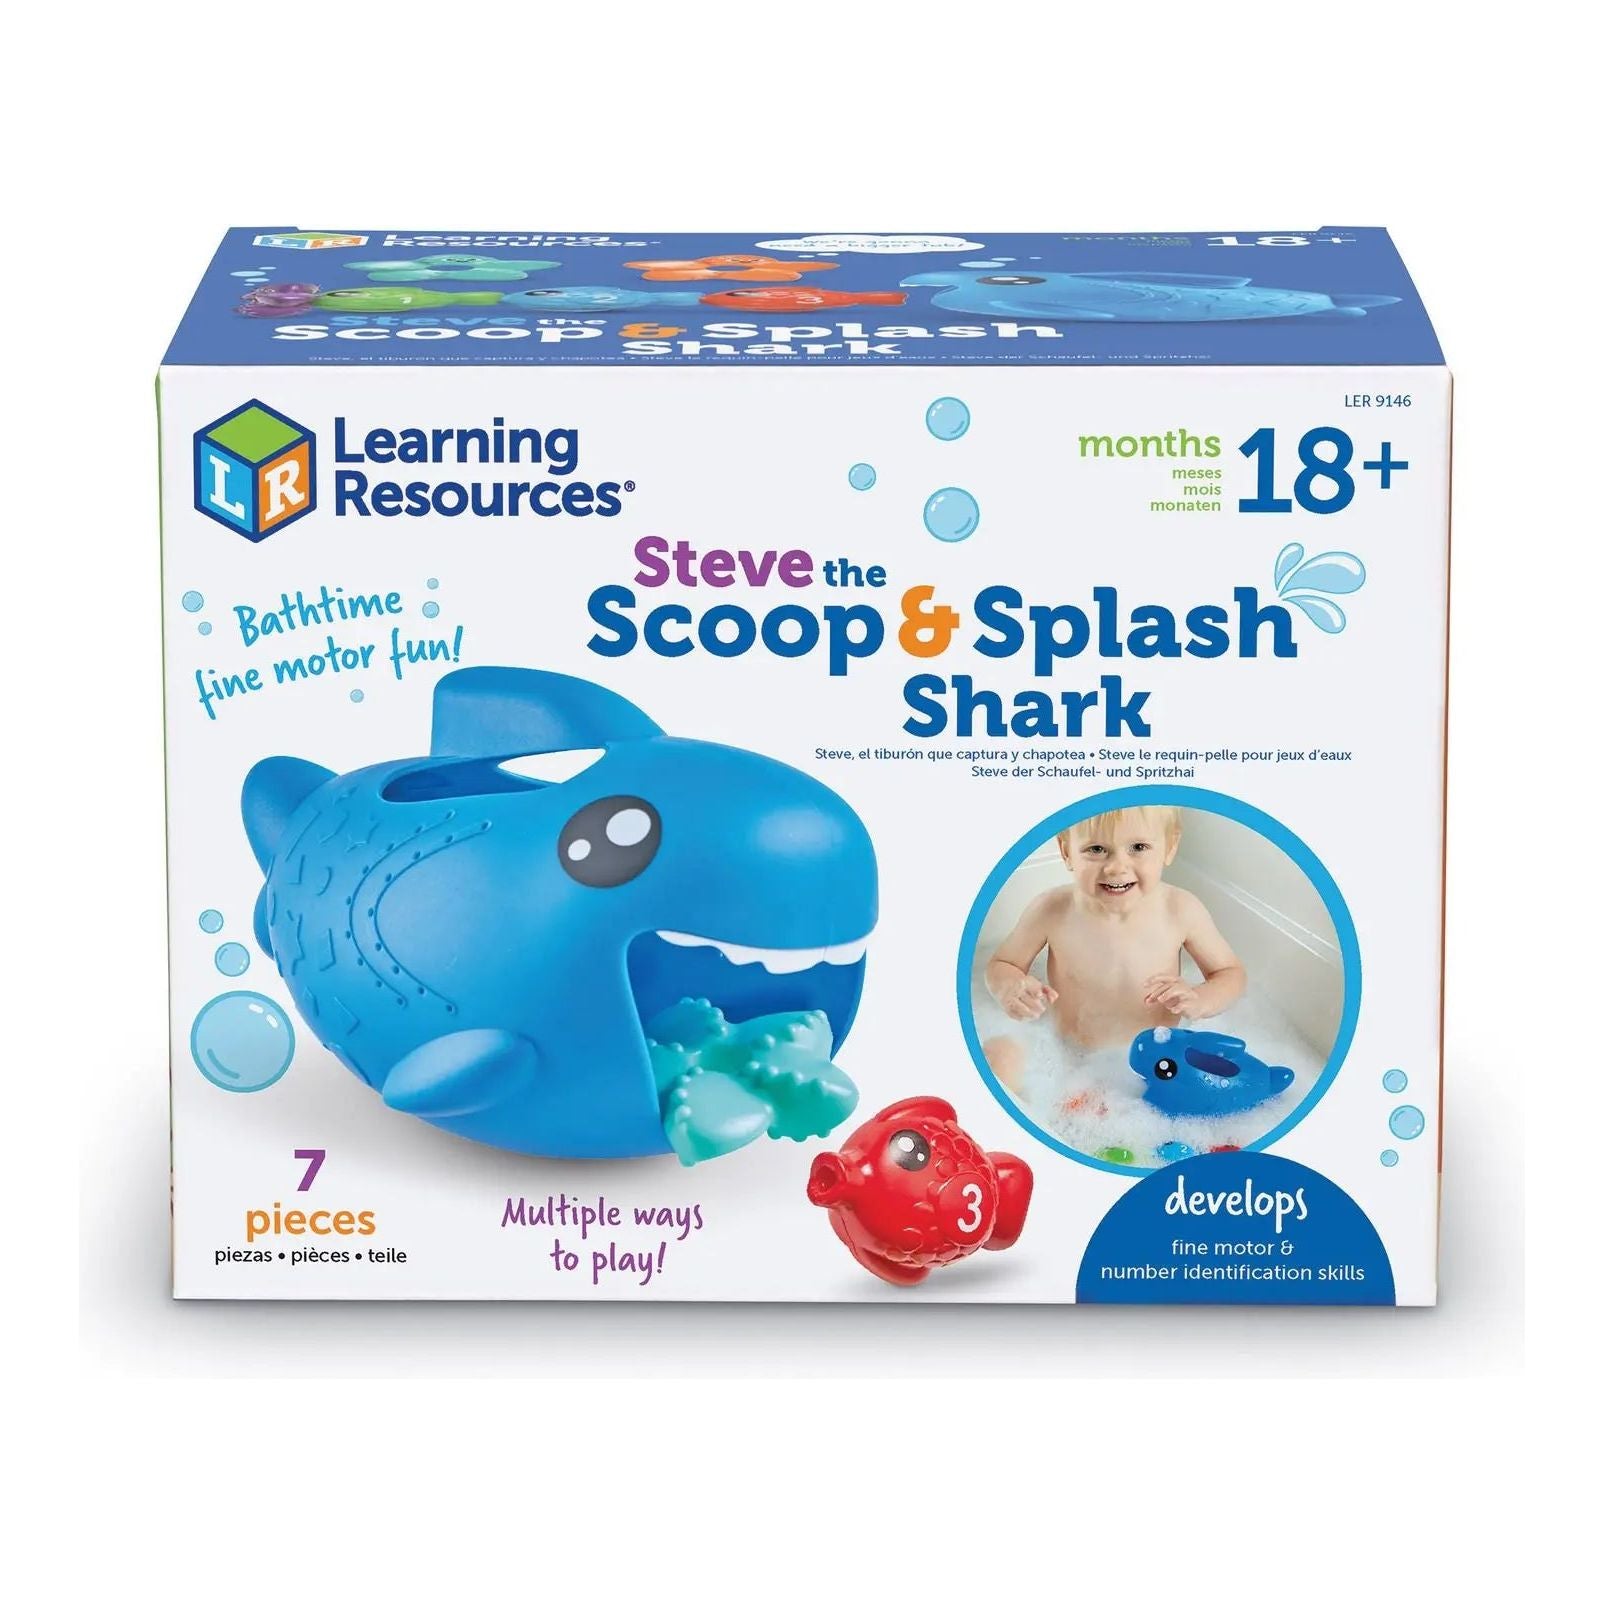 Learning Resources Steve the Scoop and Splash Shark Learning Resources